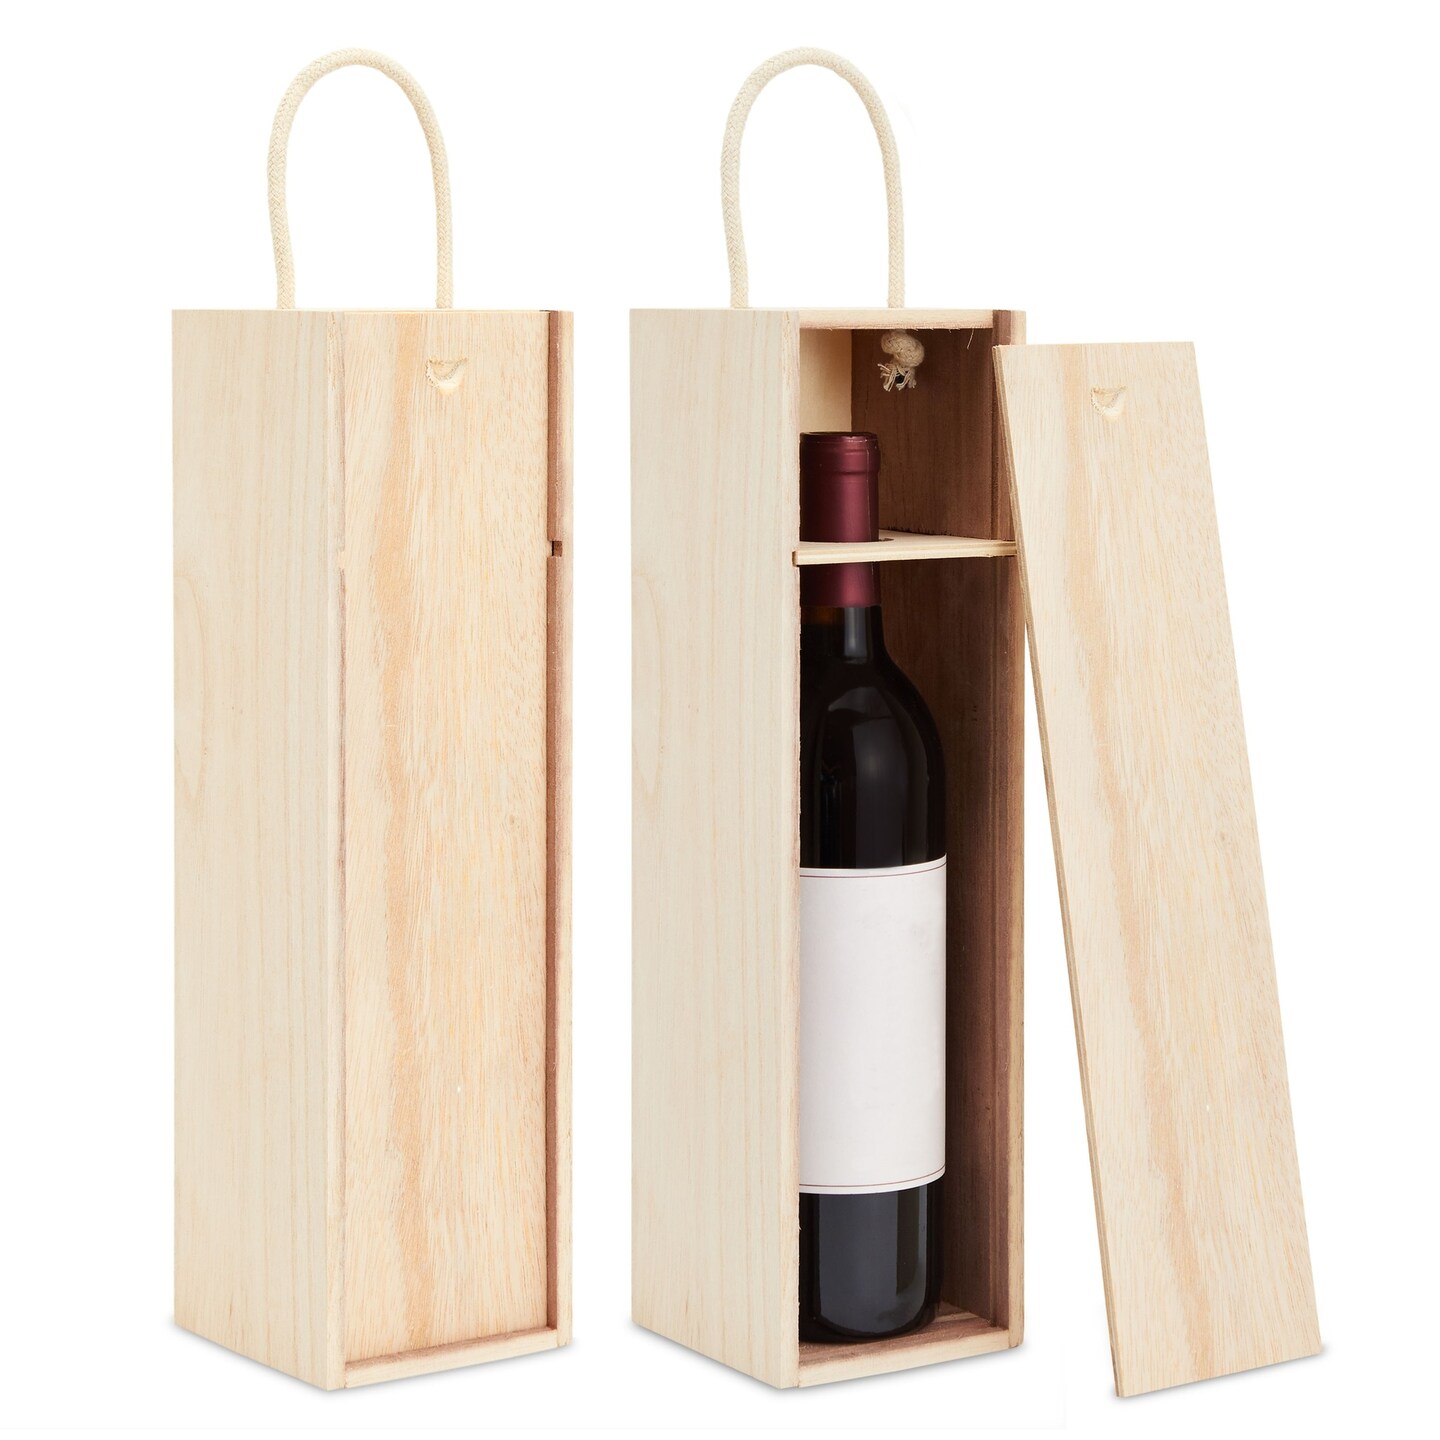 2-Pack Unfinished Wooden Wine Boxes with Handles for DIY Crafts, Gifts, Birthday and Housewarming Parties, Customizable with Paint, Engravings, and Imprints (14x4 in)